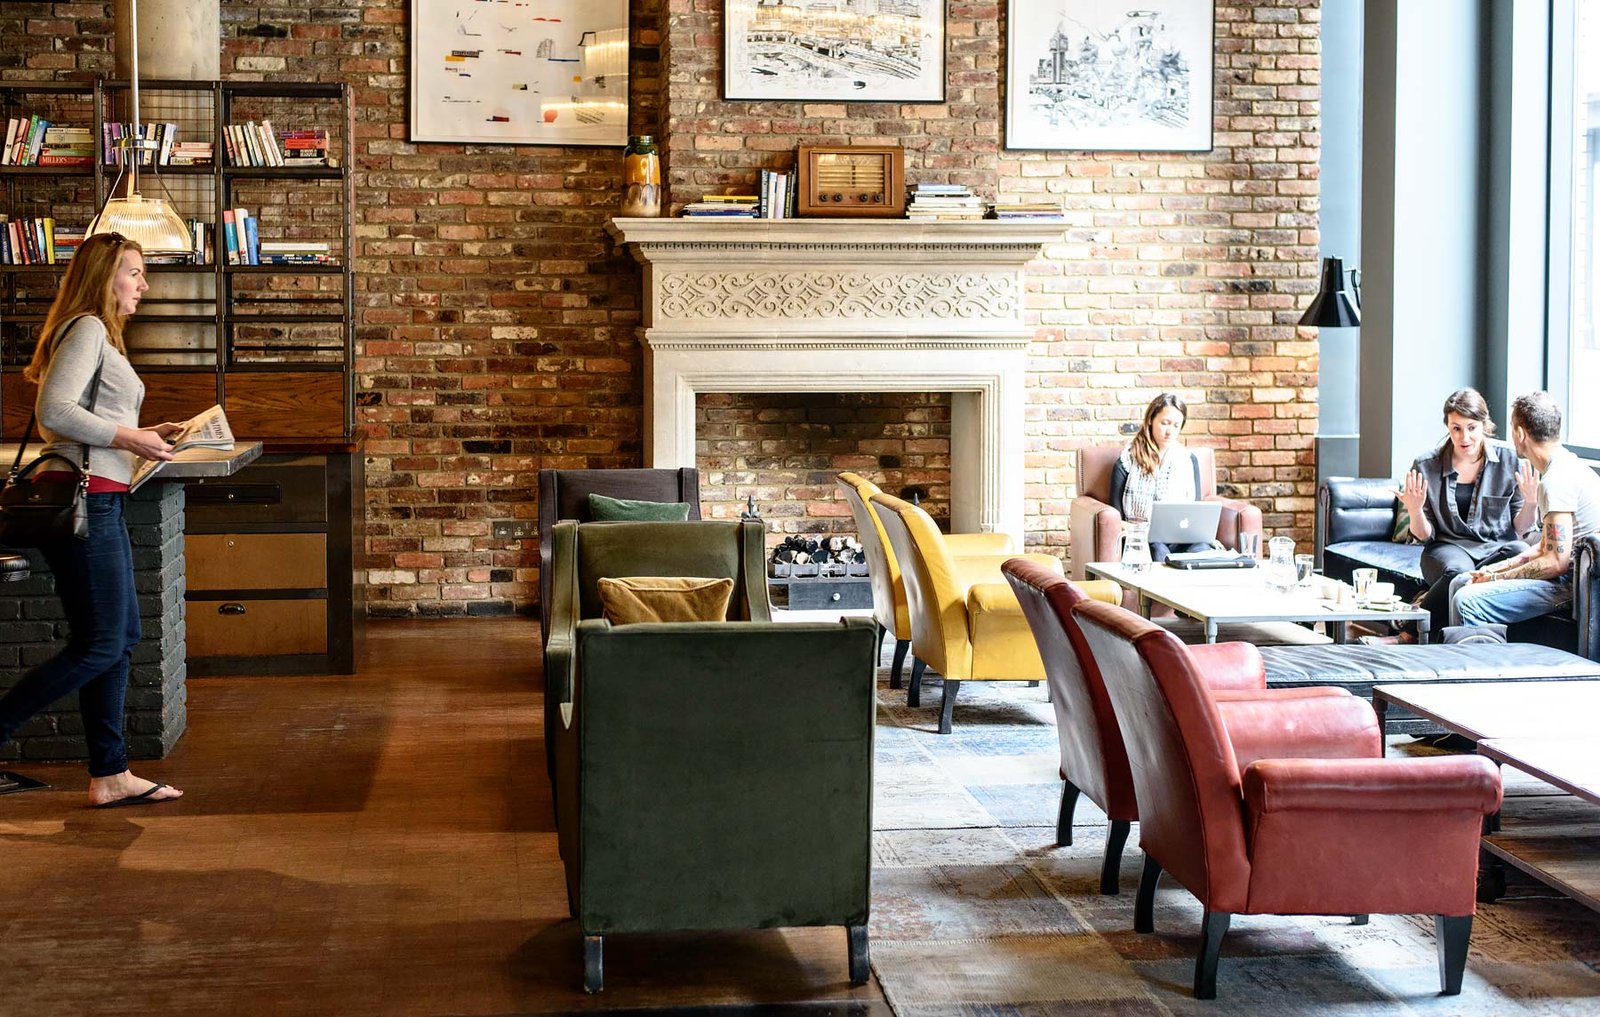 Staycation at The Hoxton in Shoreditch: Trendy boutique hotel in East London.